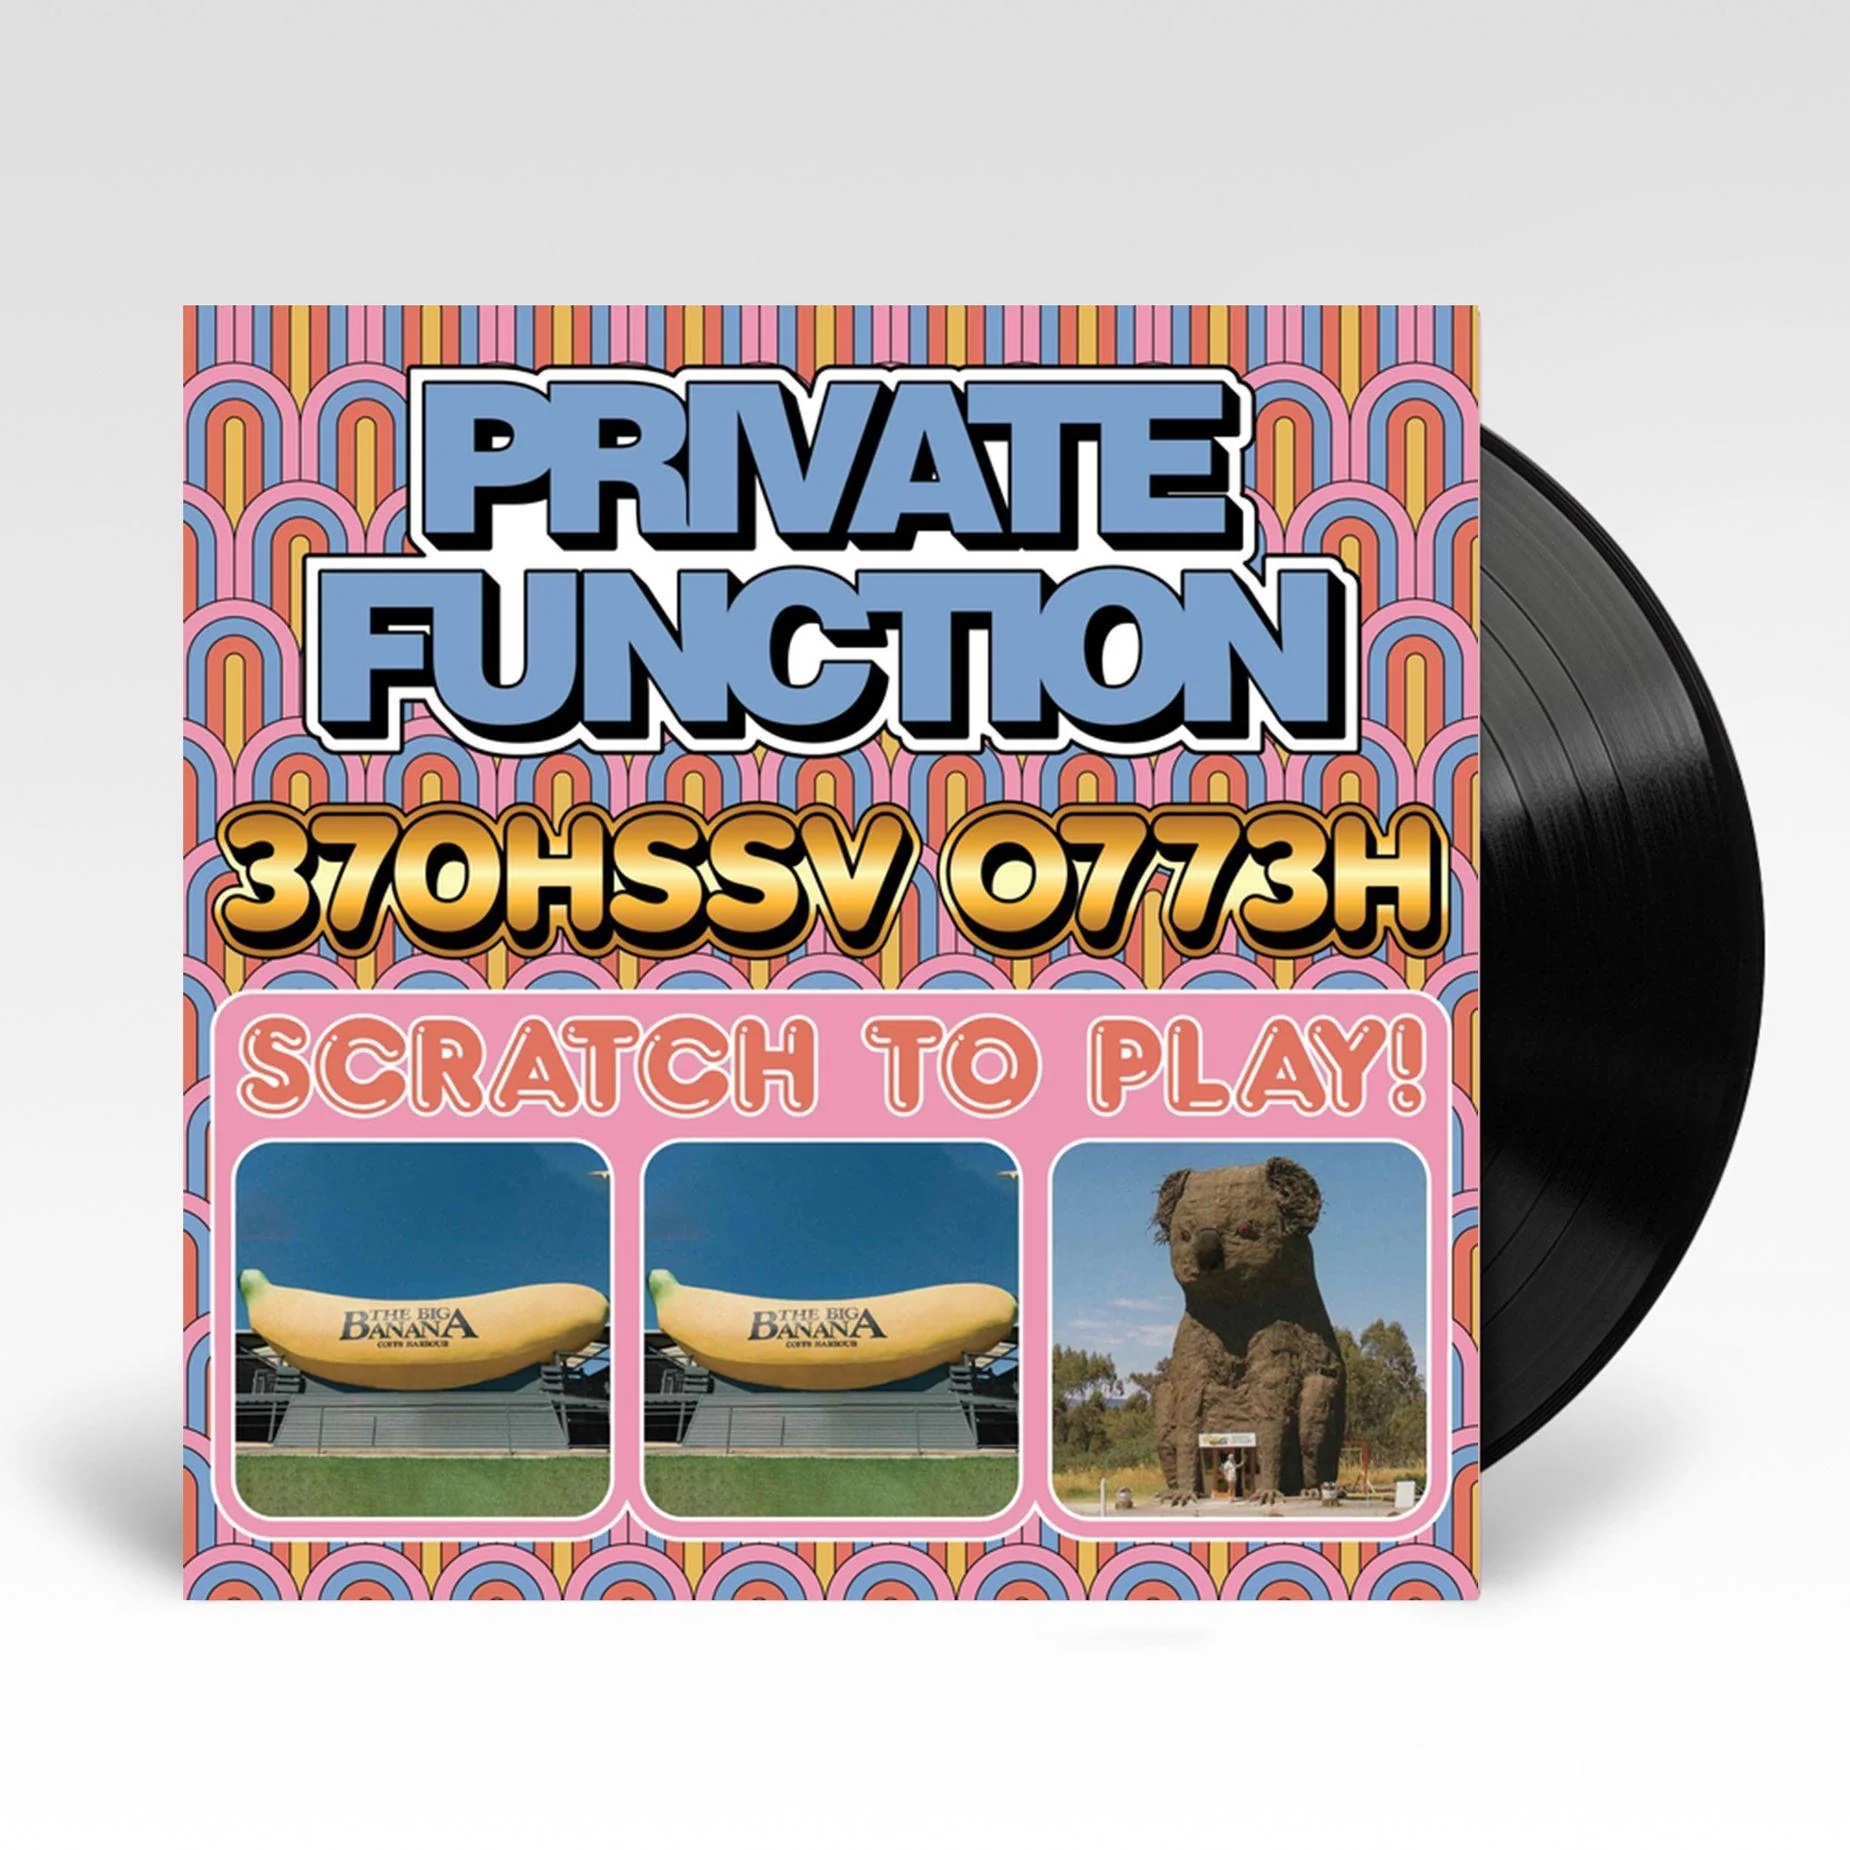 Private Function – 370HSSV 0773H